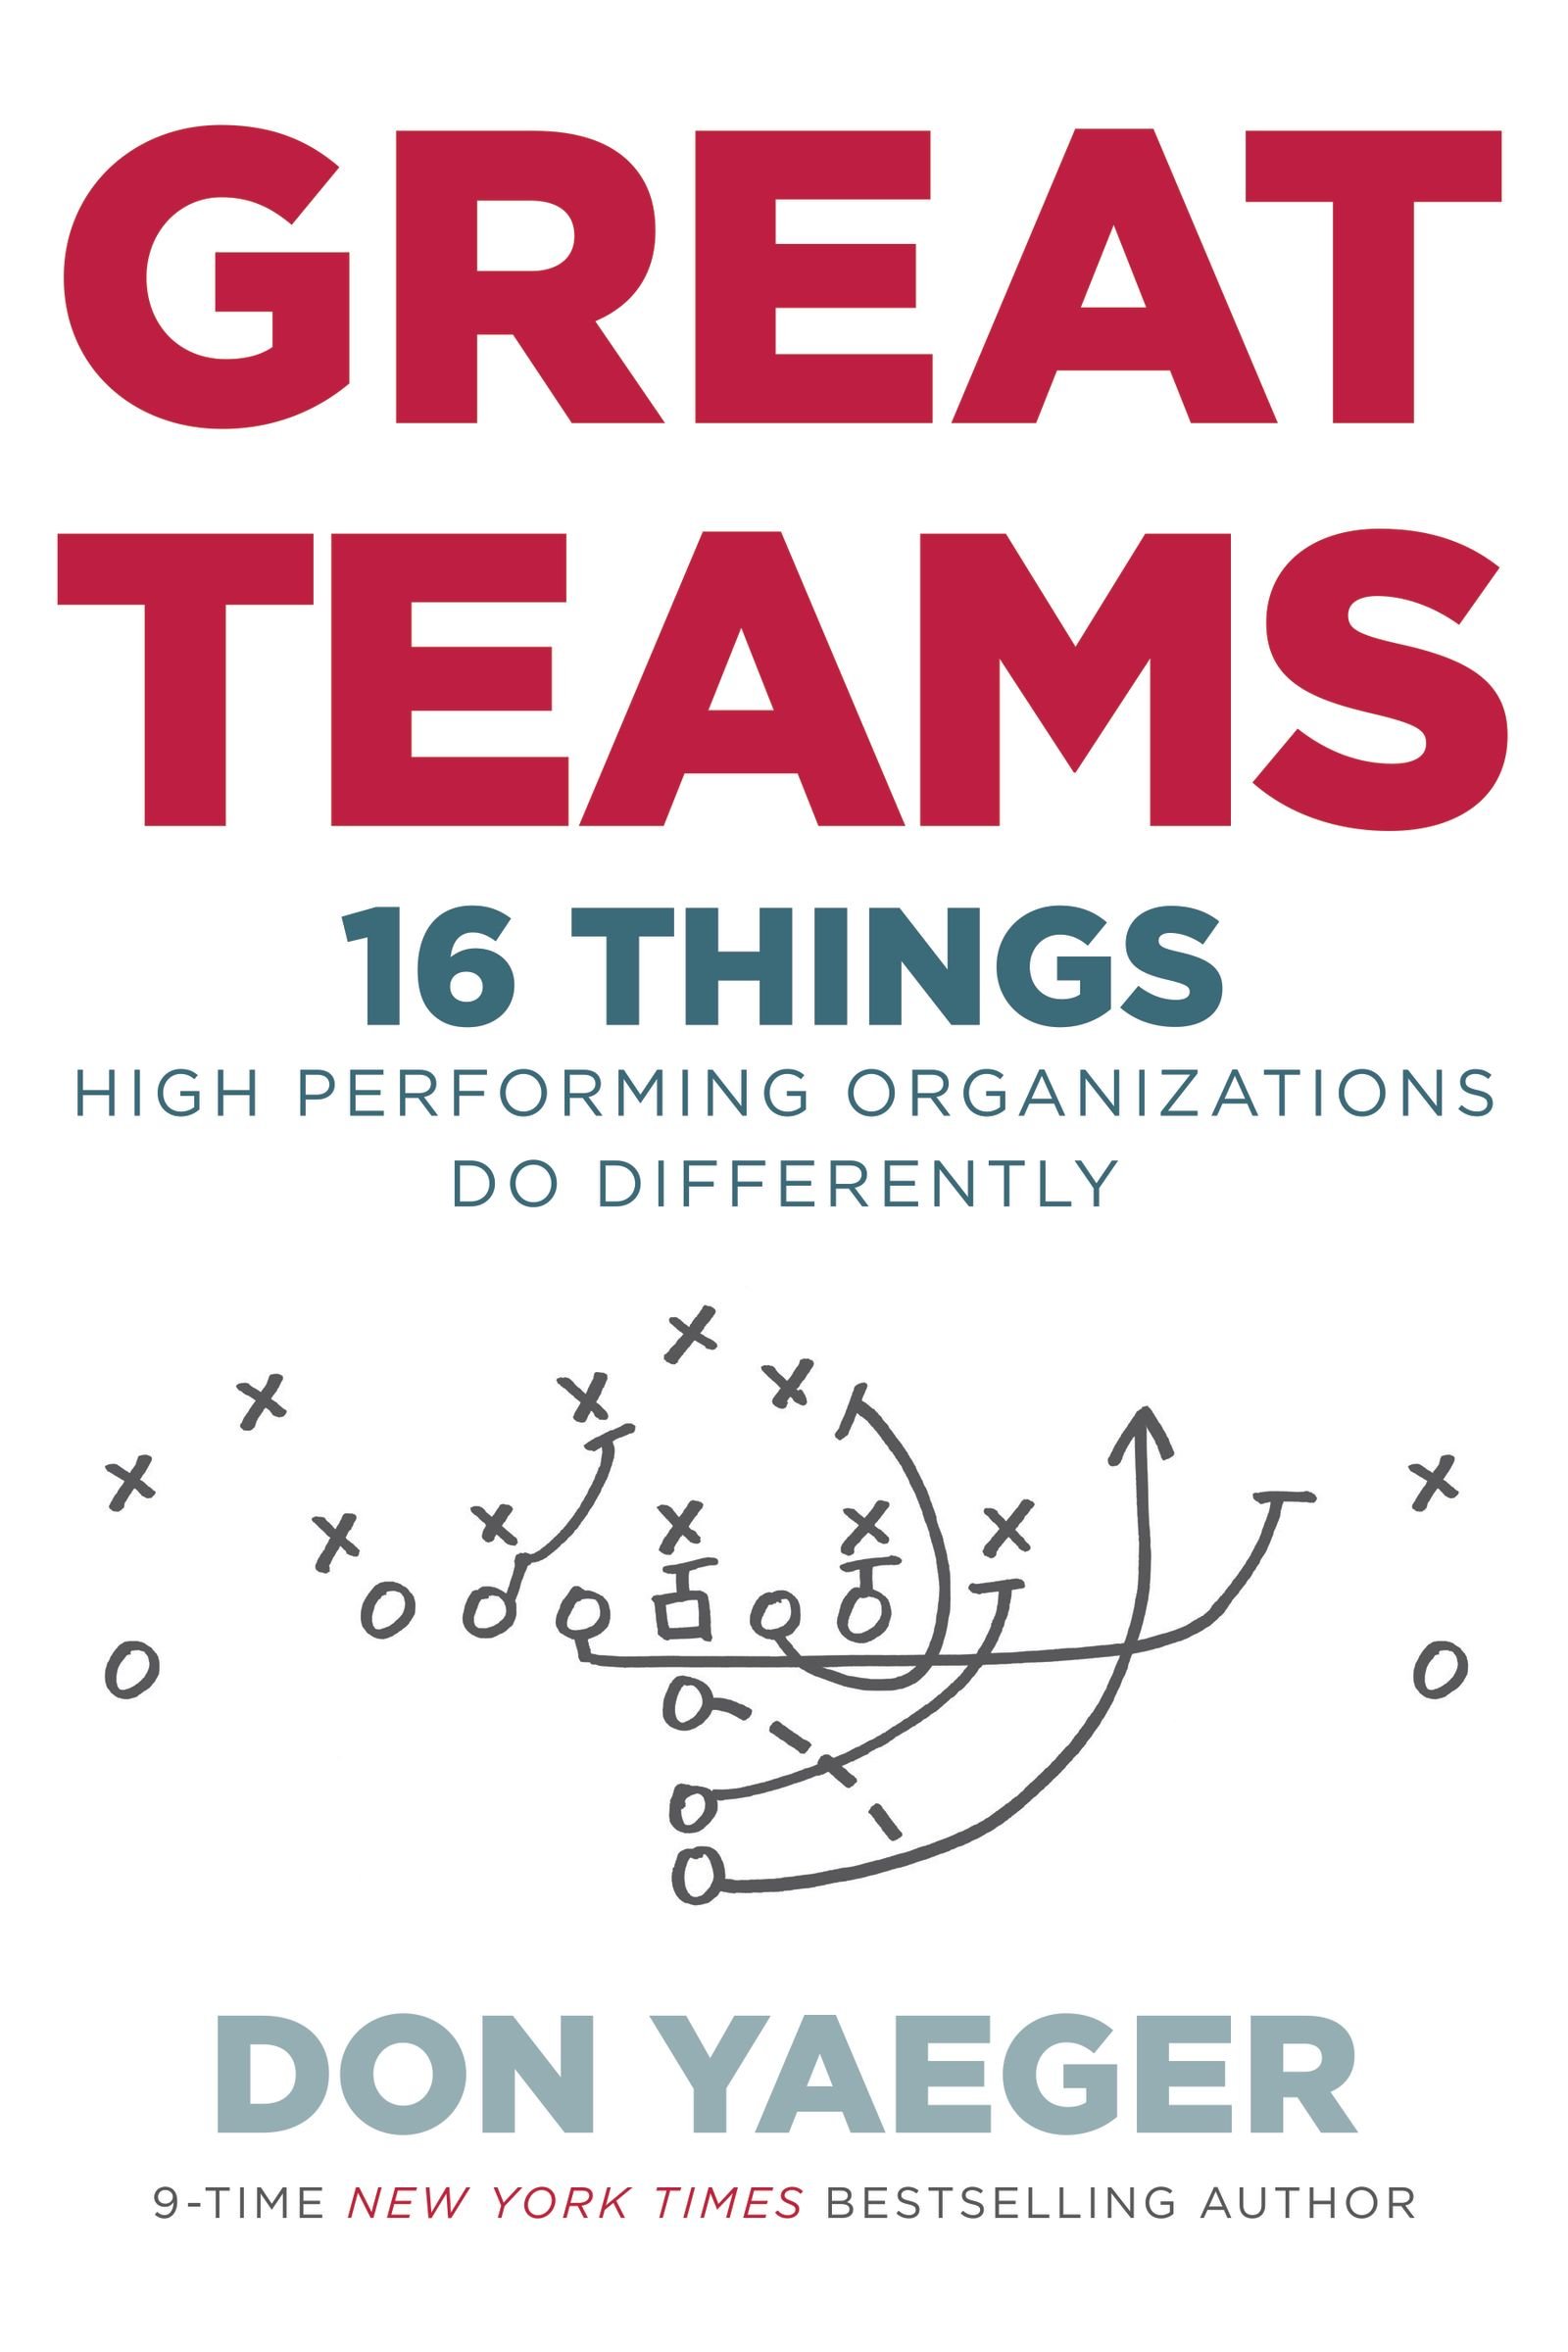 Great Teams 16 Things High Performing Organizations Do Differently
Epub-Ebook